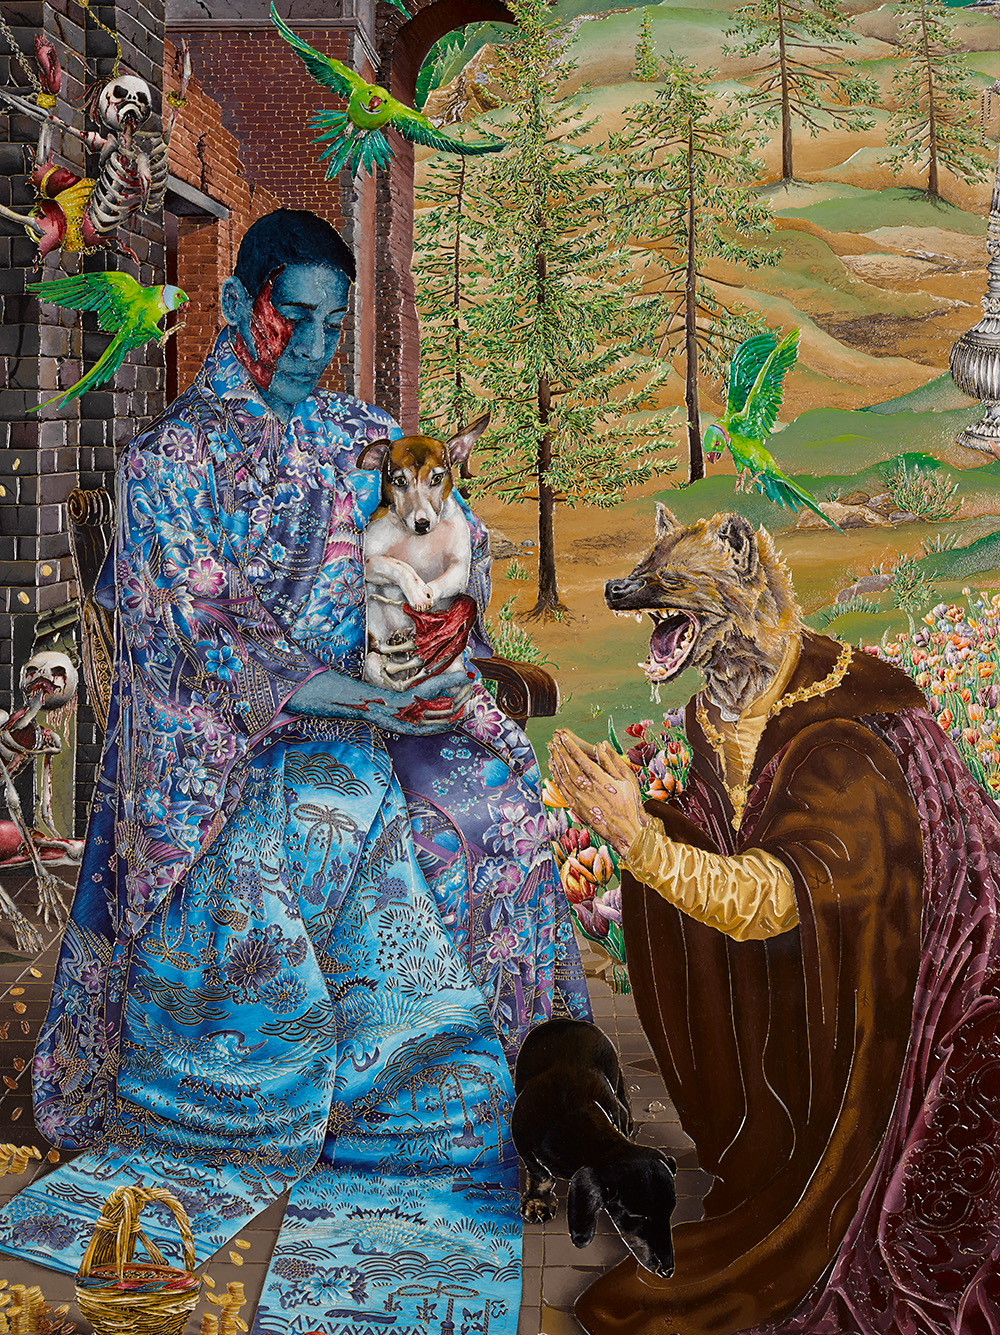 Wolf-headed human figure kneels before a person with blue skin holding a dog